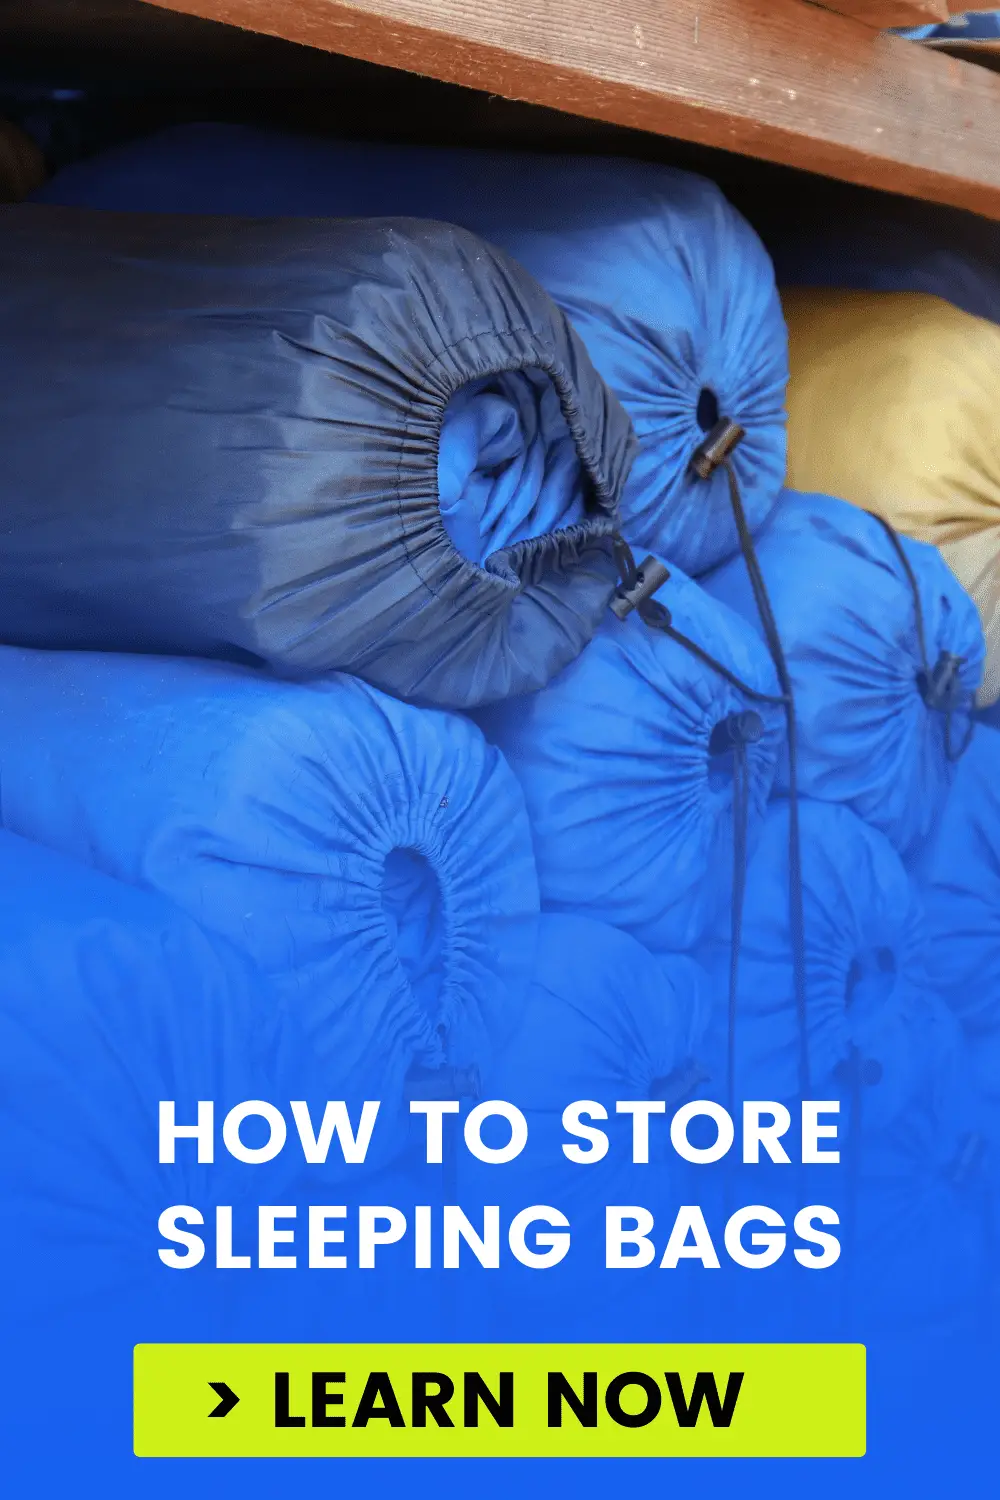 How to store sleeping bags